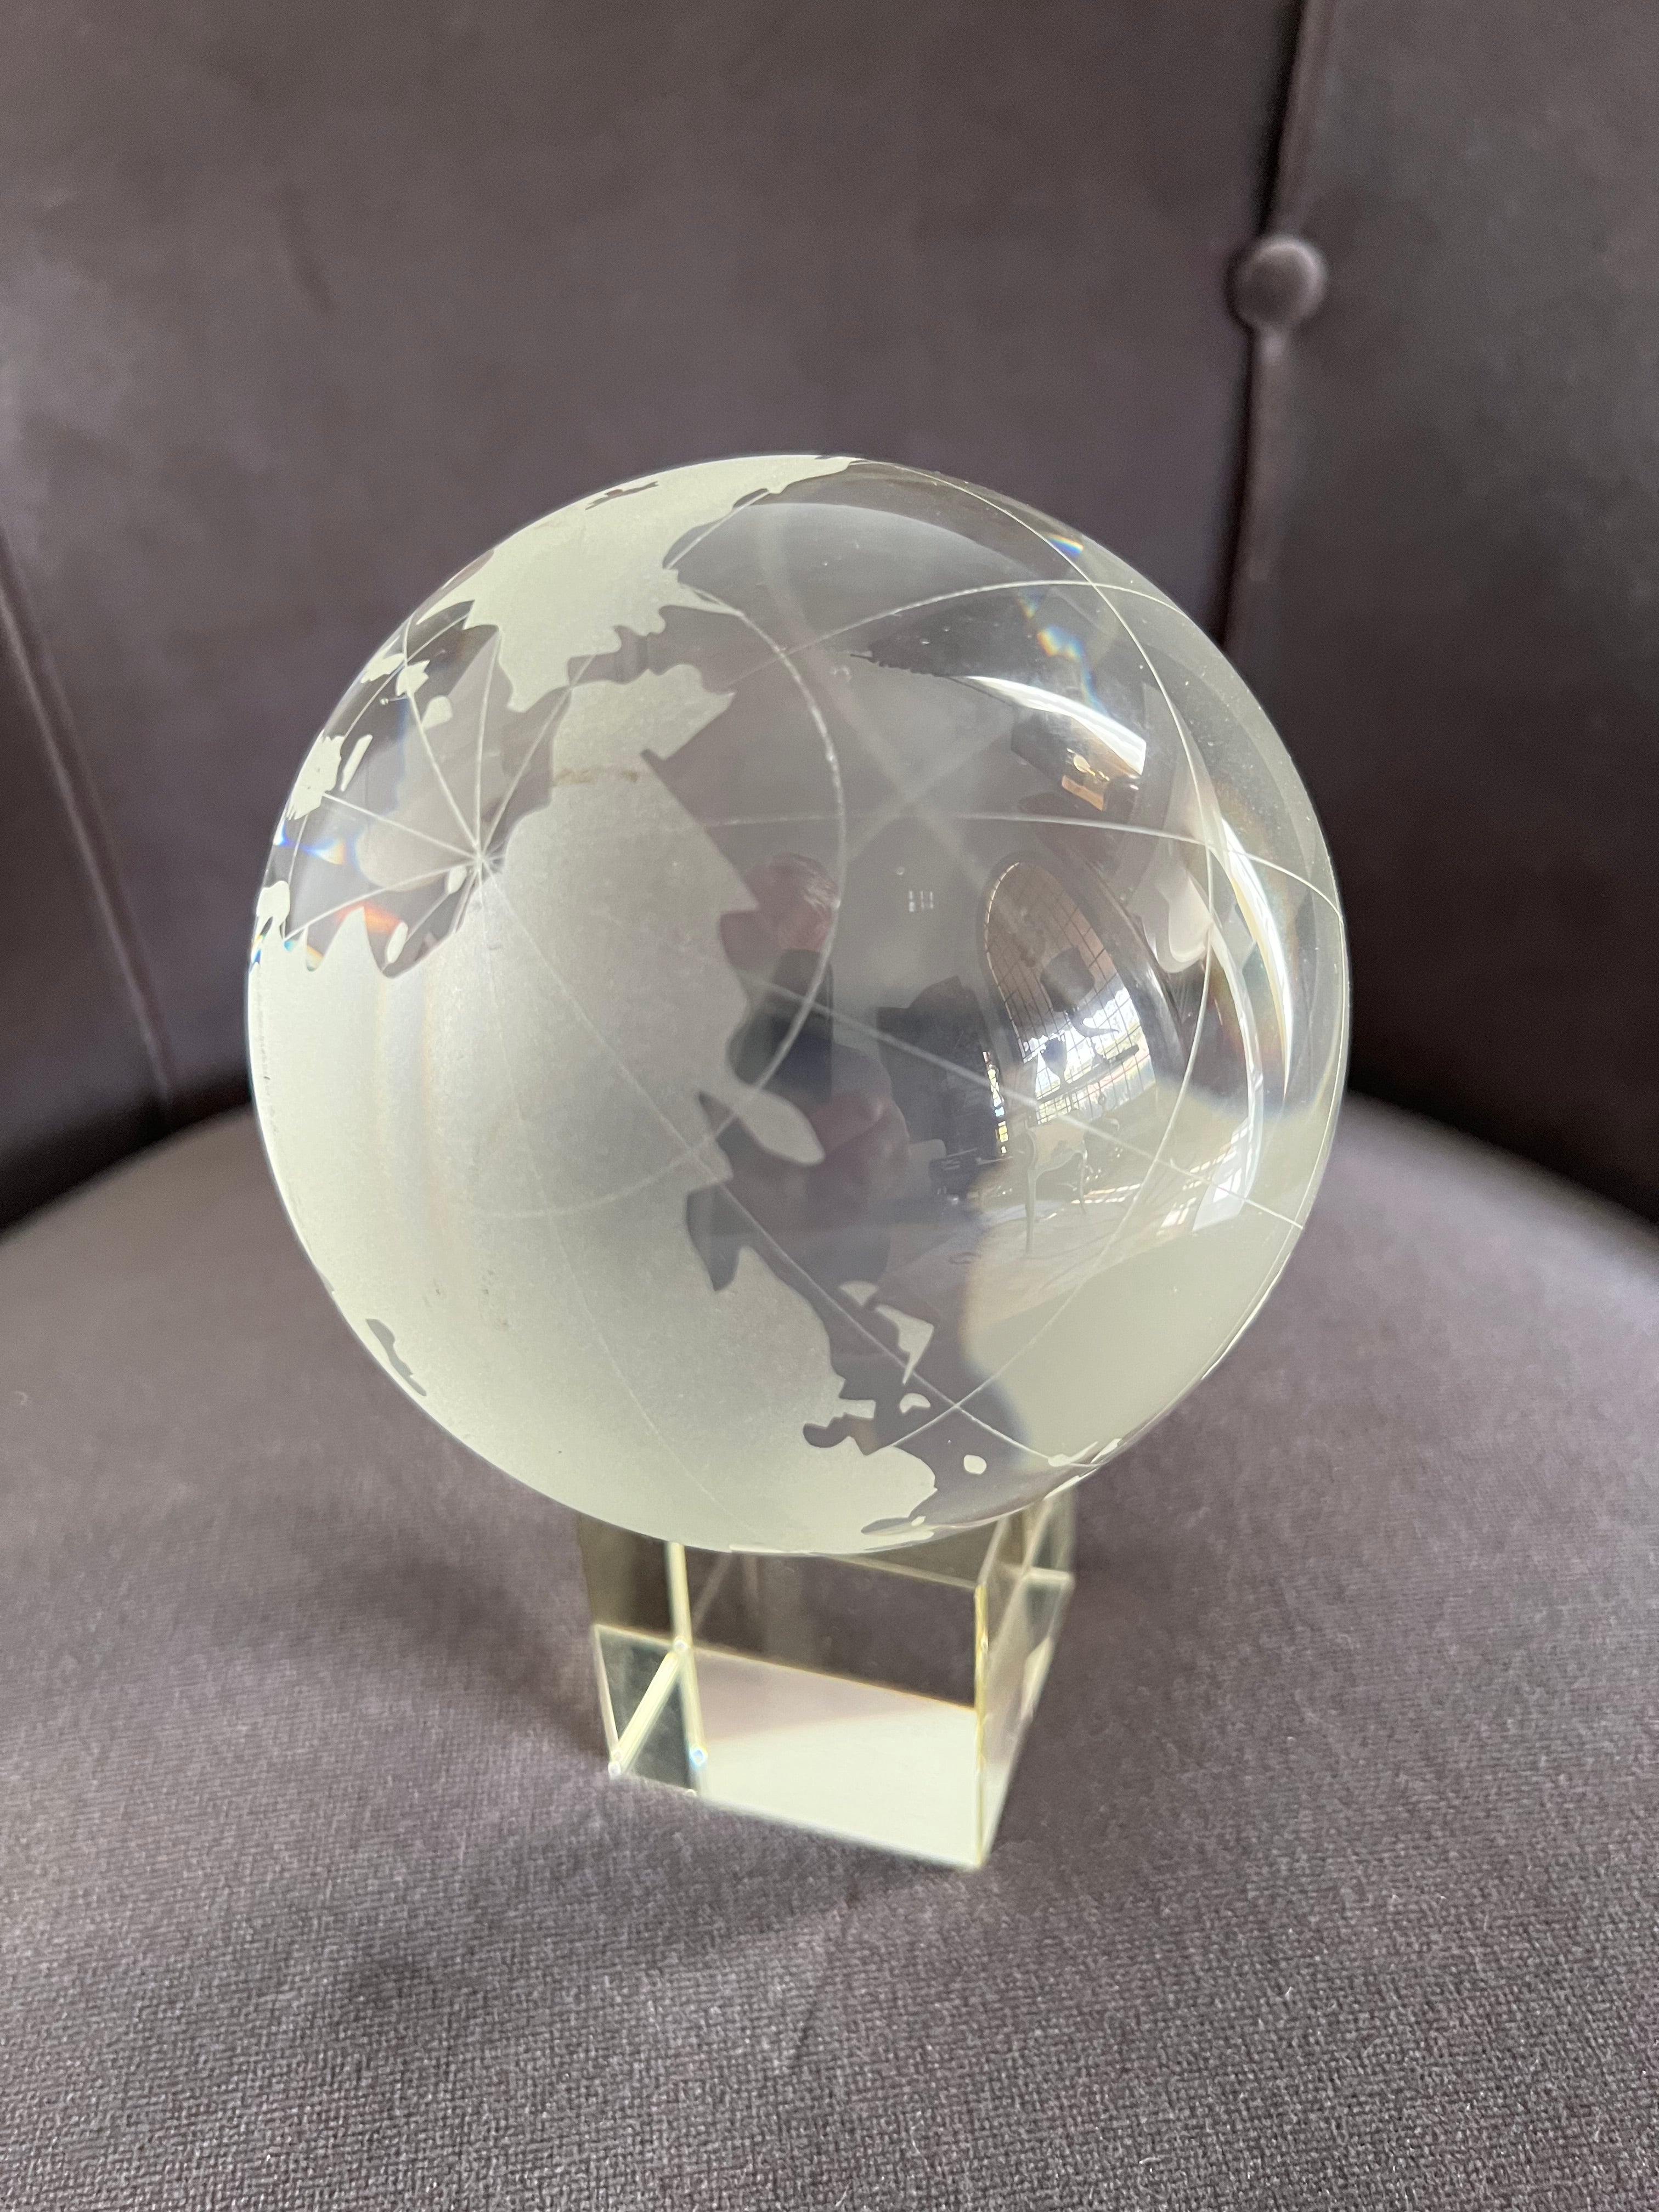 For those who wish to feel the weight of the world. A beautiful globe with etched continents against oceans of crystal glass. This globe sits atop a 2